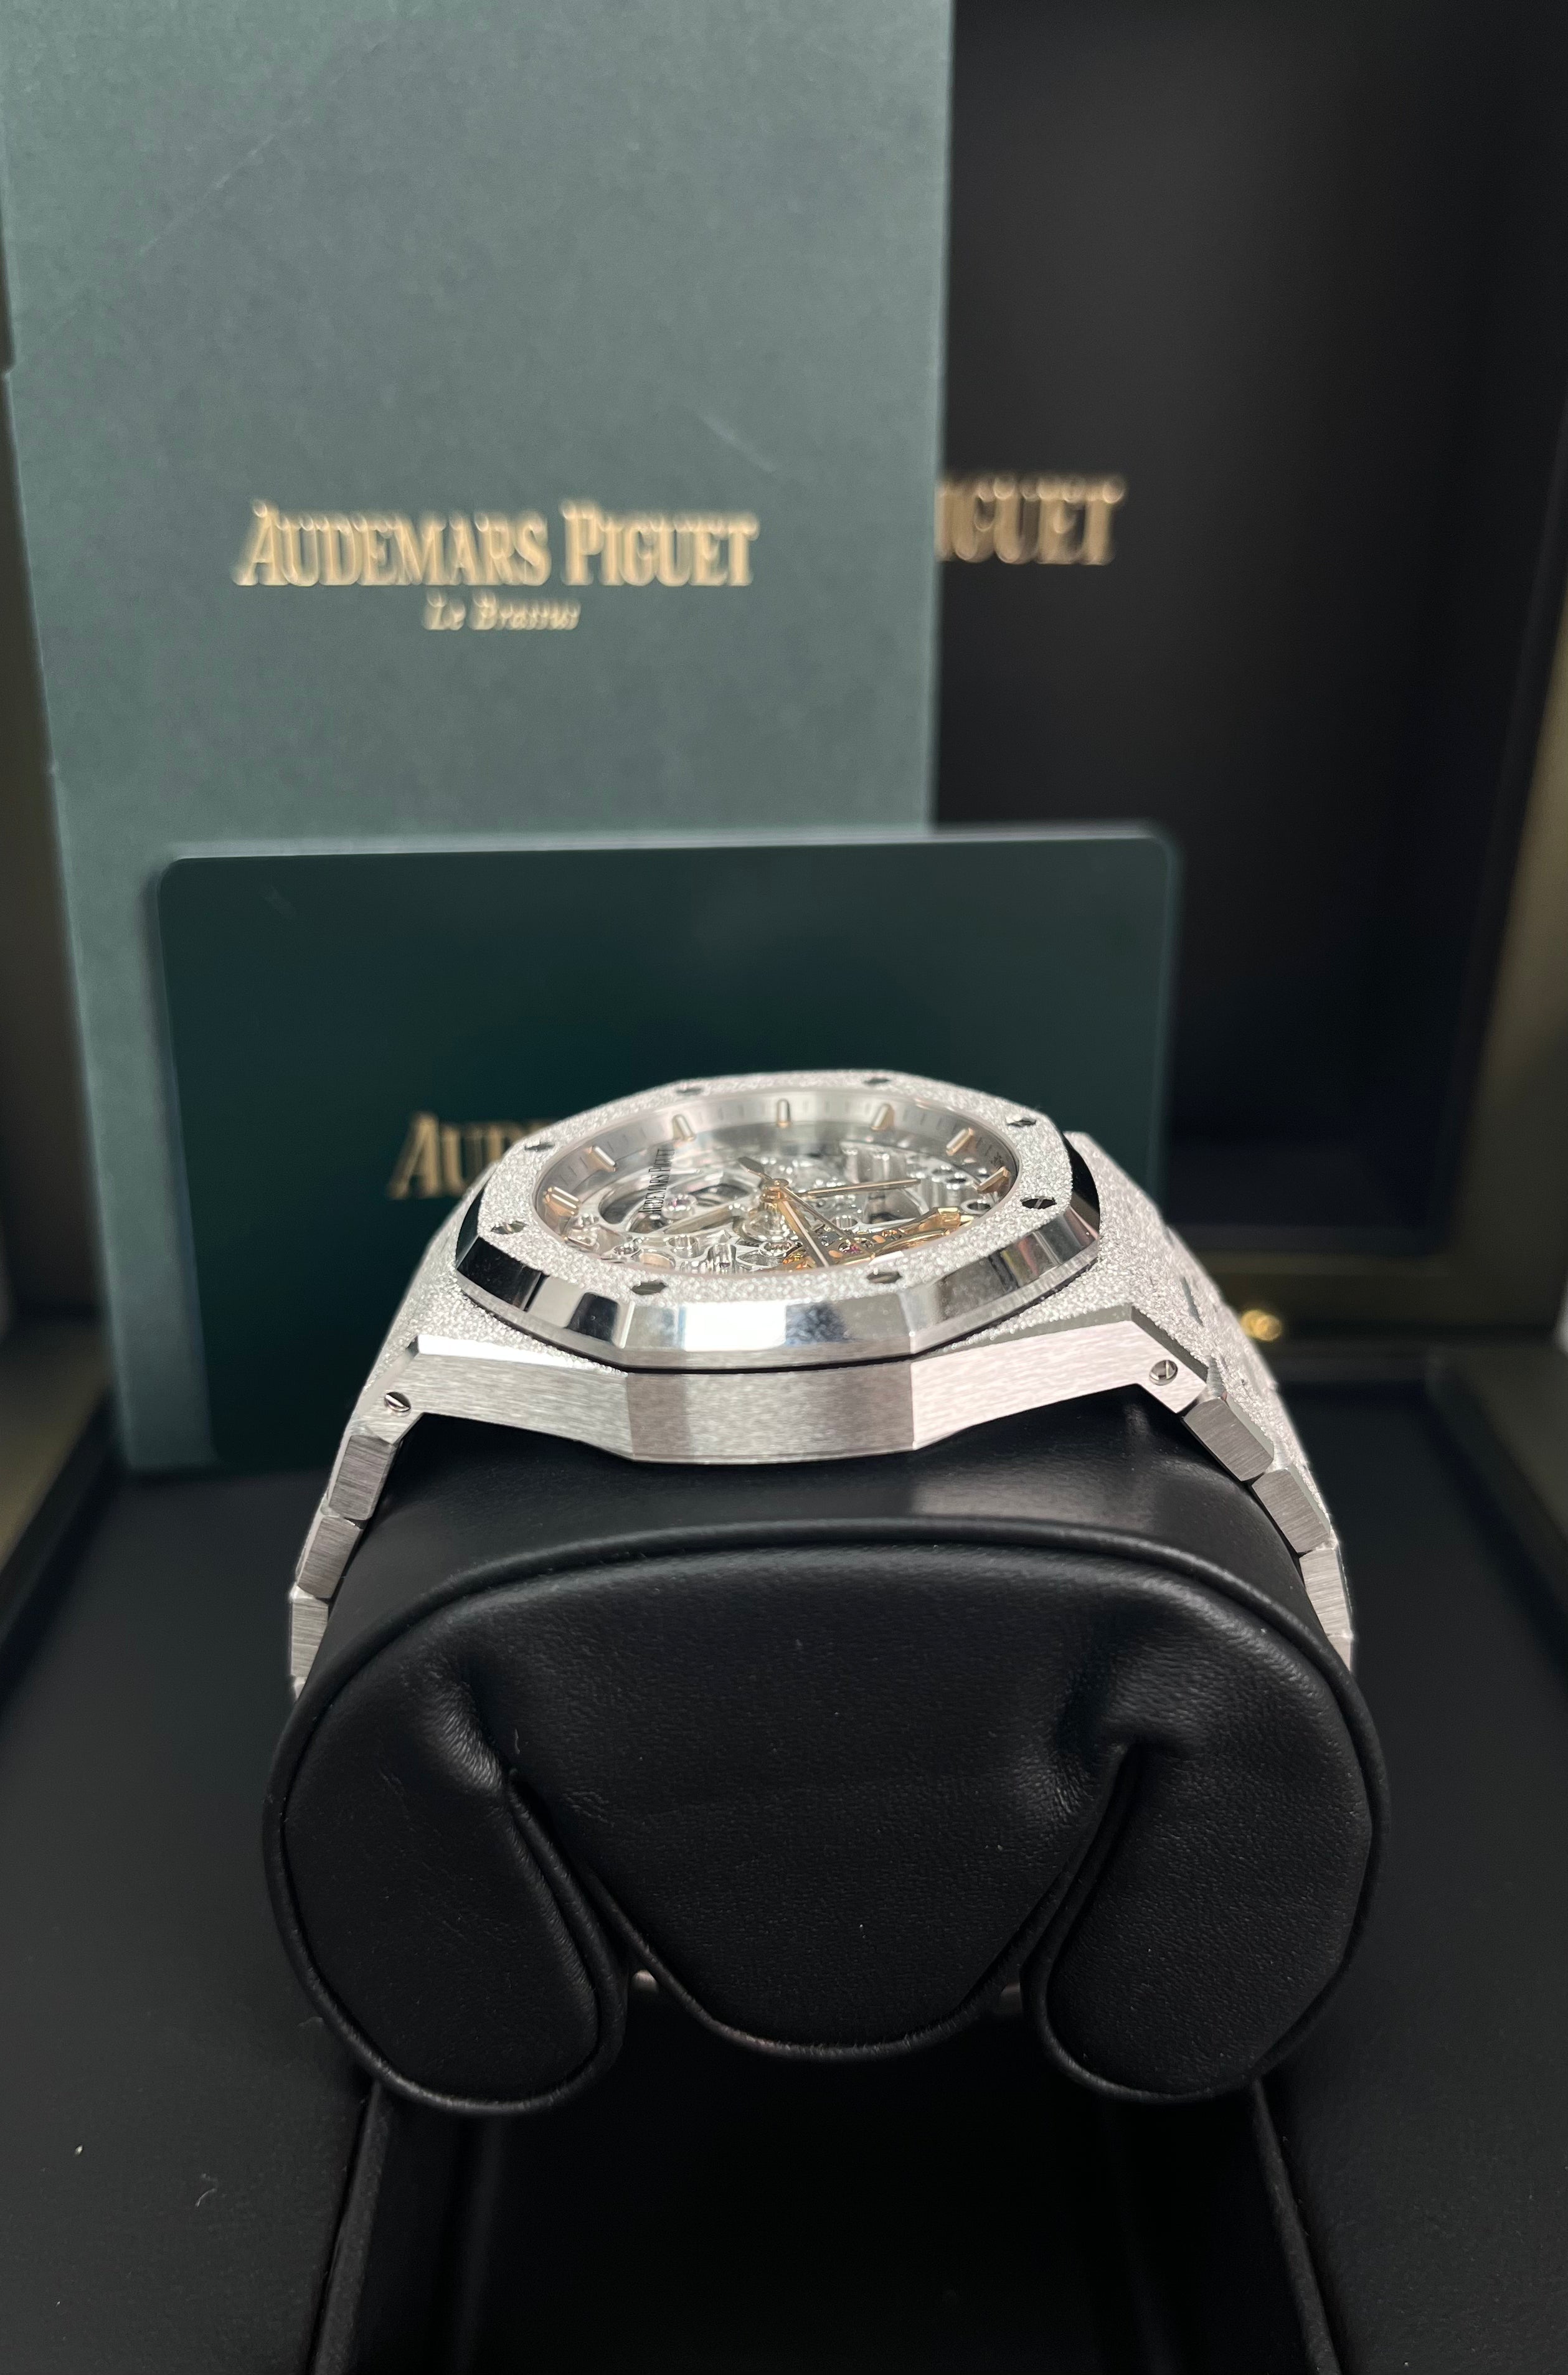 Audemars Piguet ROYAL OAK DOUBLE BALANCE WHEEL OPENWORKED Frosted Skeleton 37mm (Ref # 15466BC.GG.1259BC.01)